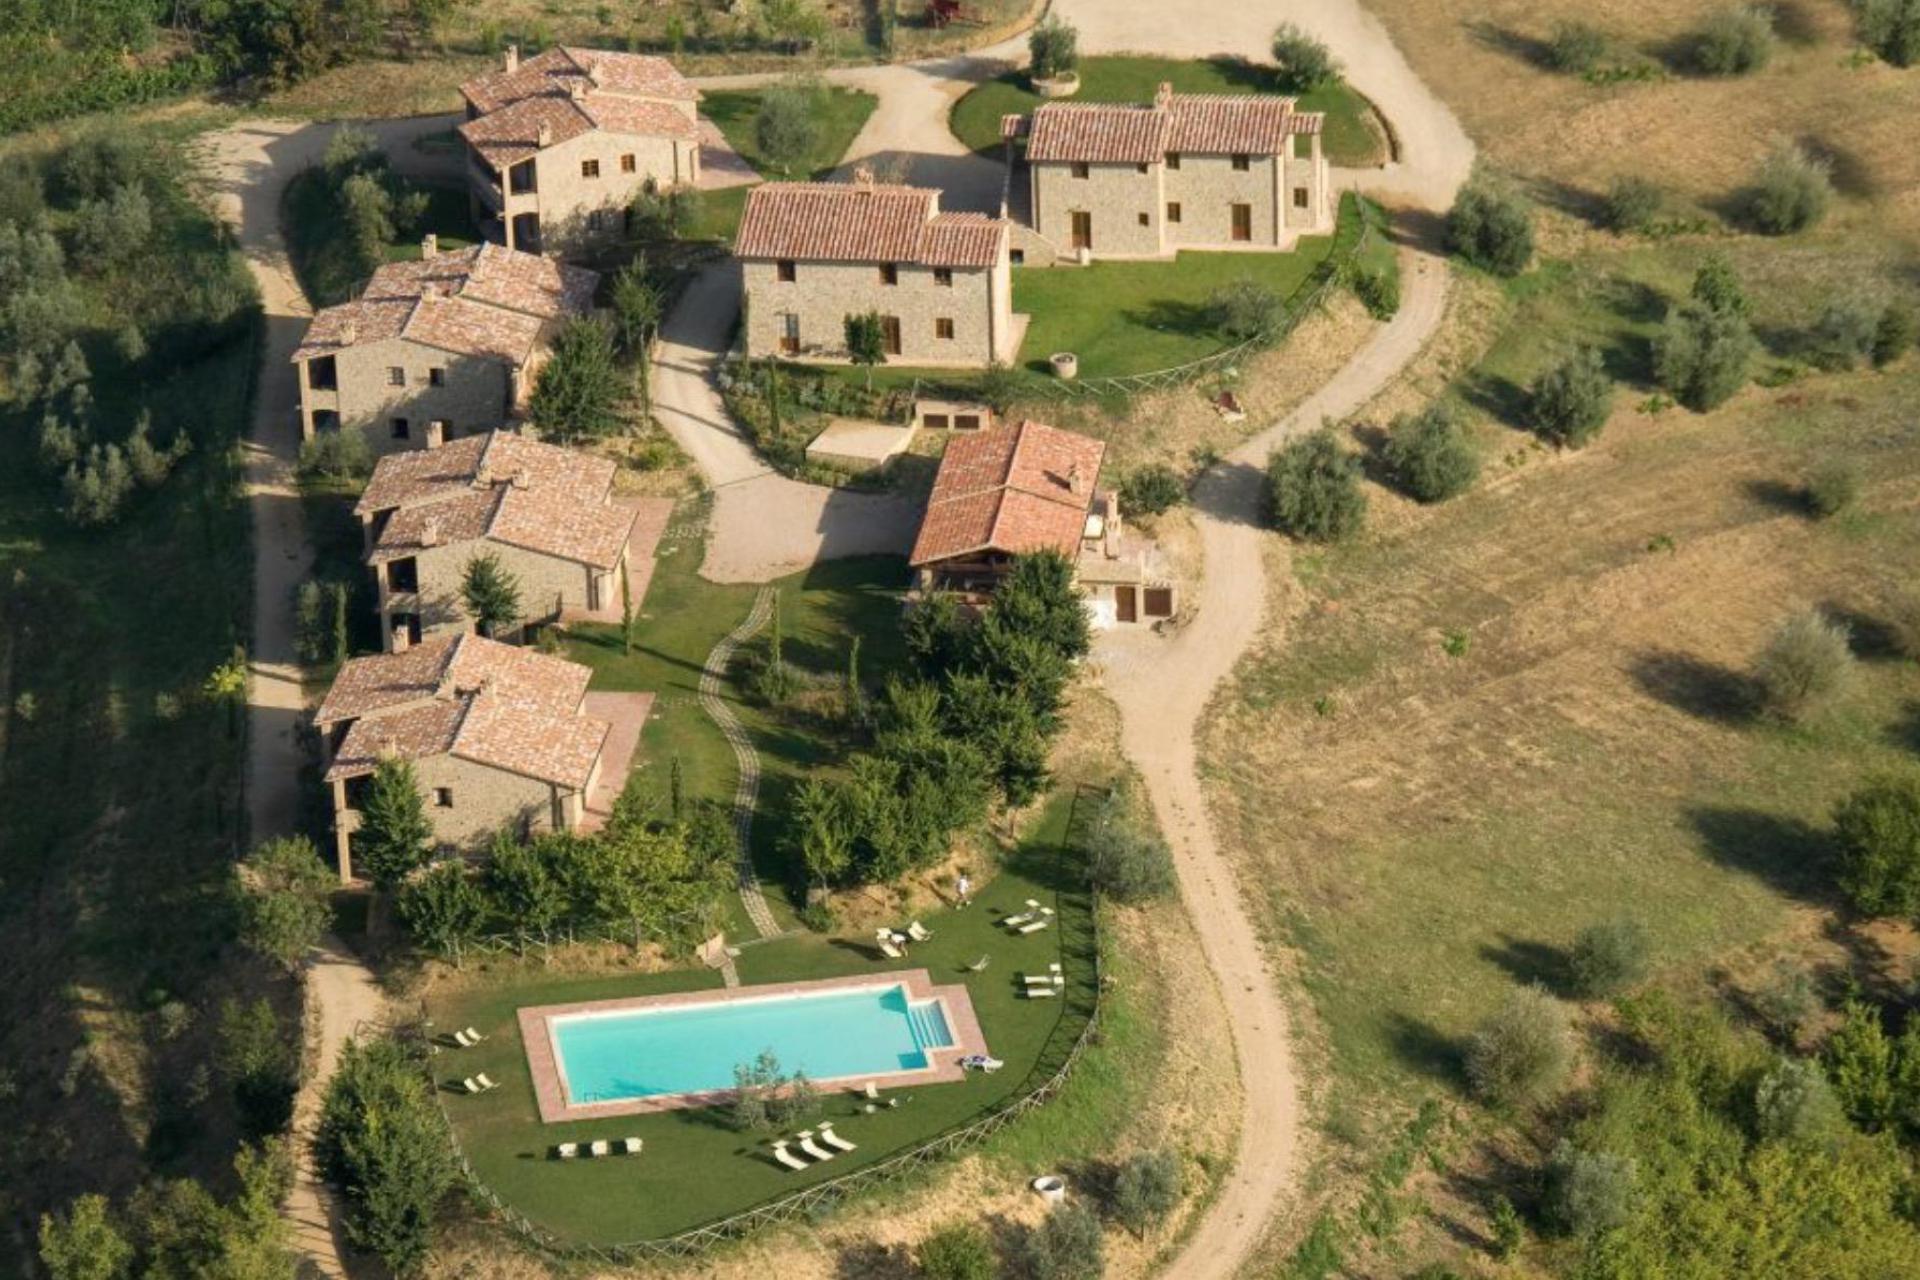 Agriturismo between Tuscany and Umbria, within walking distance of a village